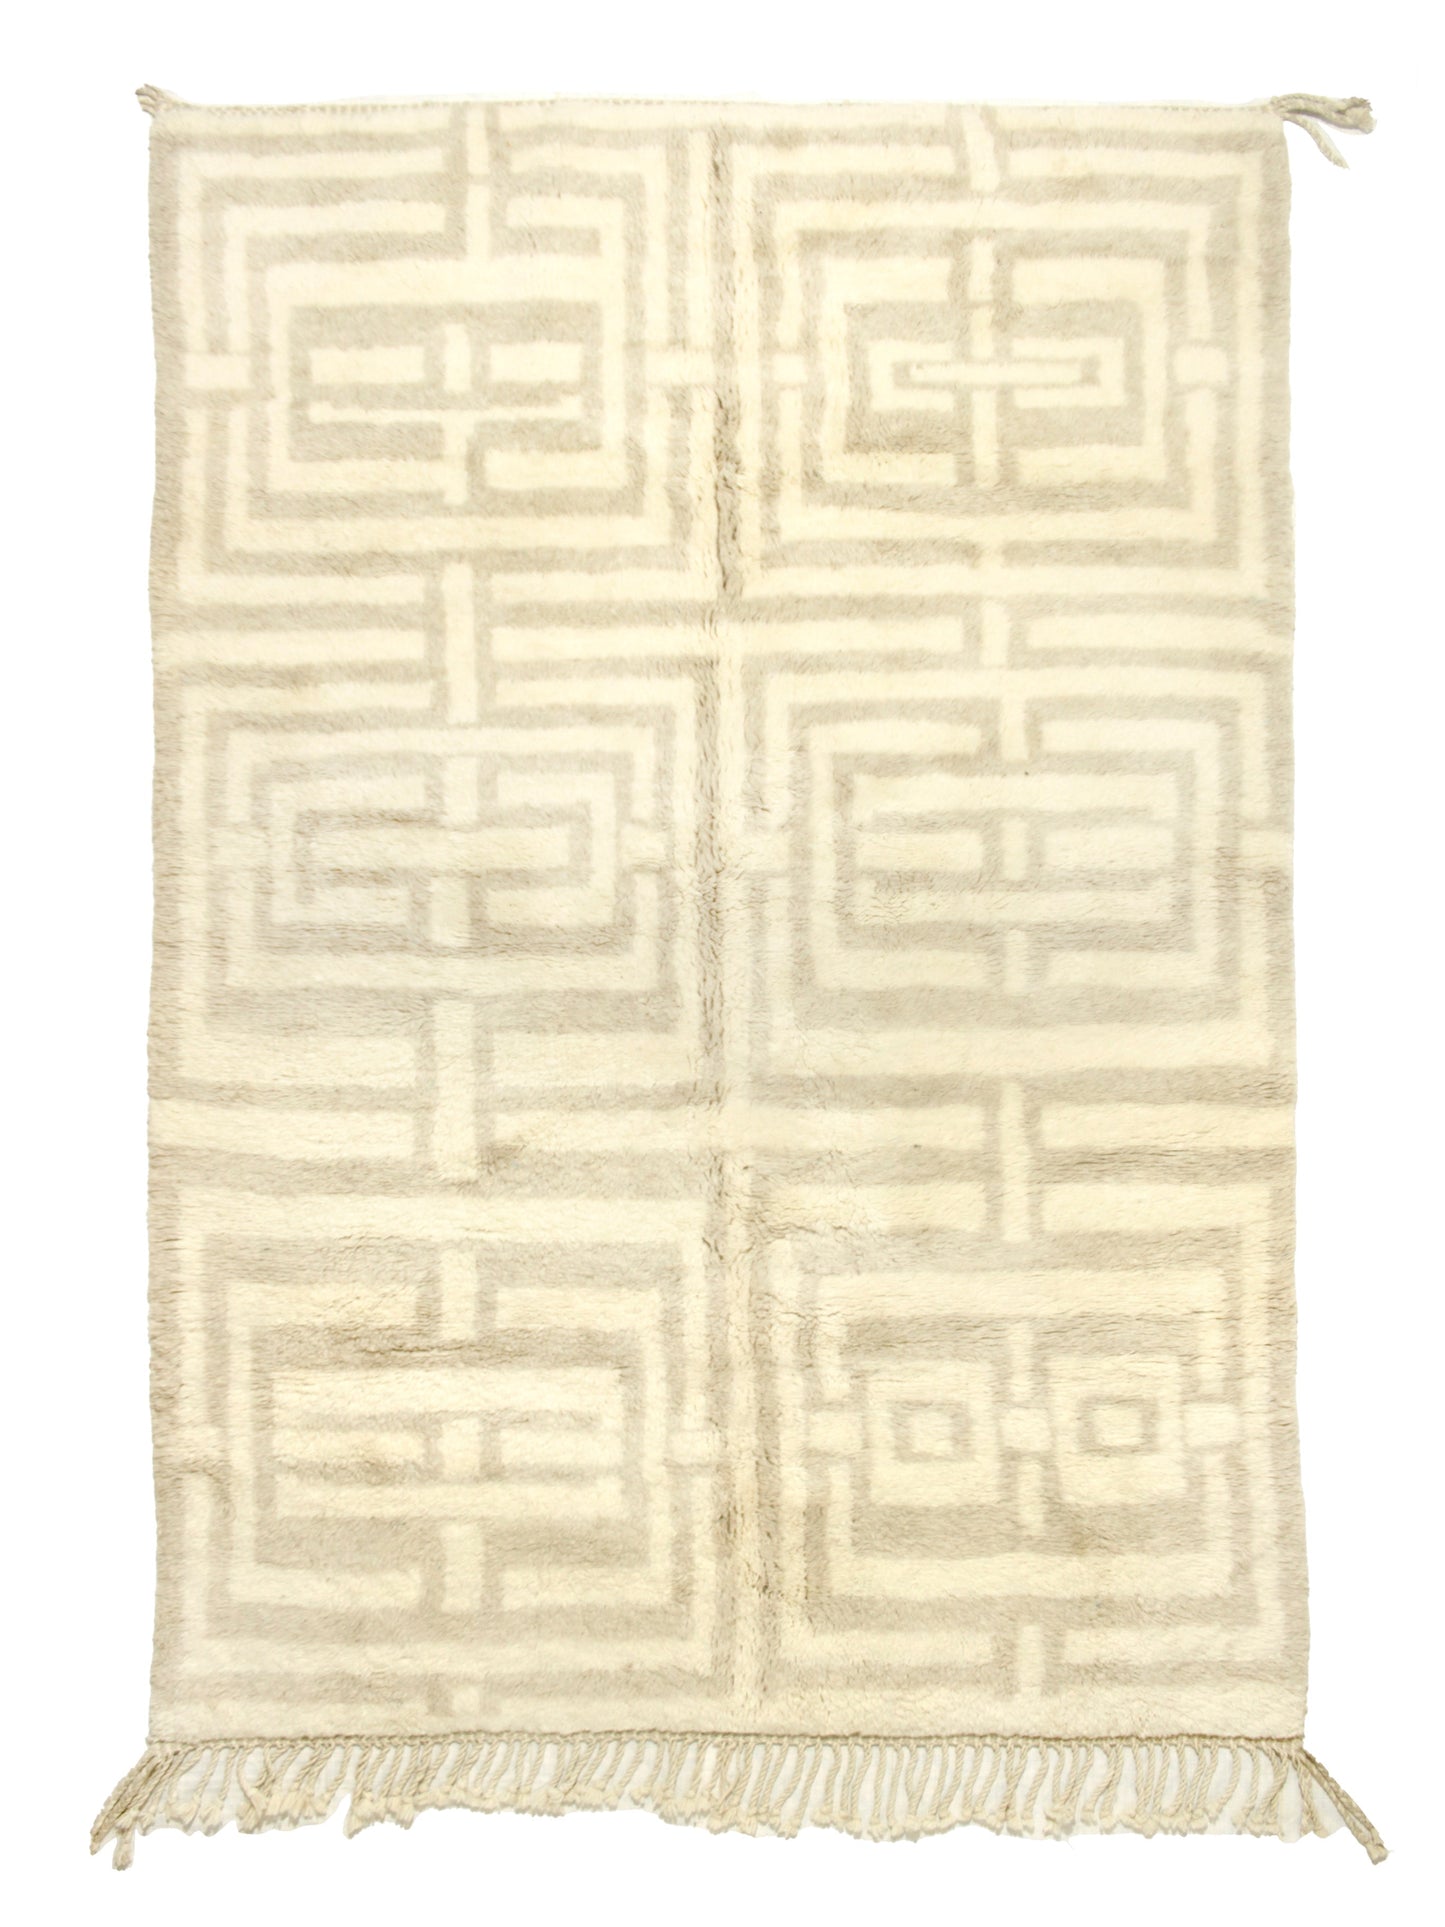 moroccanrugs, carpets, rugs, area rugs, ruggable rugs, outdoor rugs